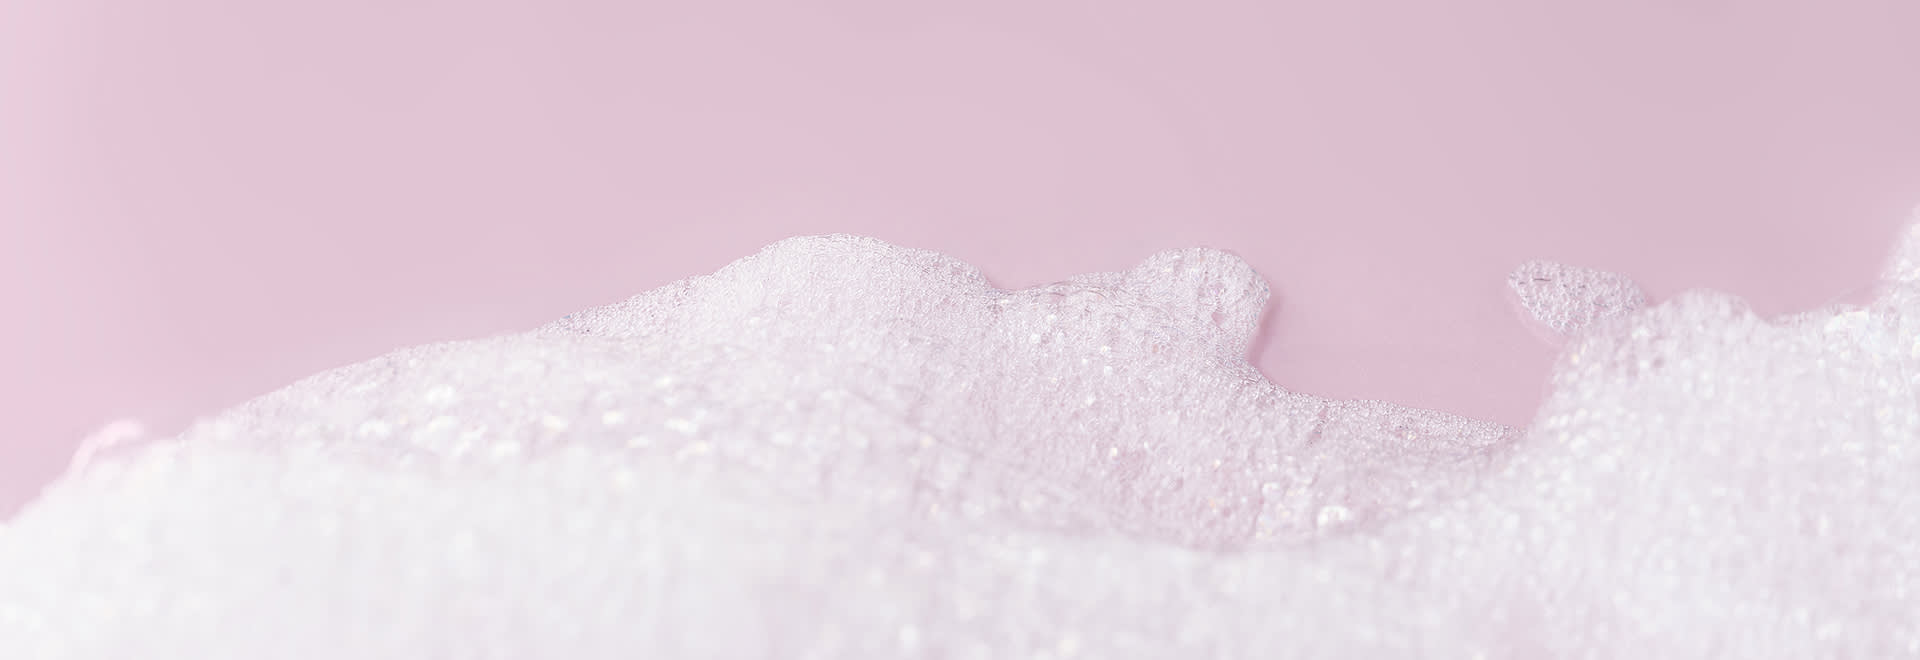 A foam on the pink surface